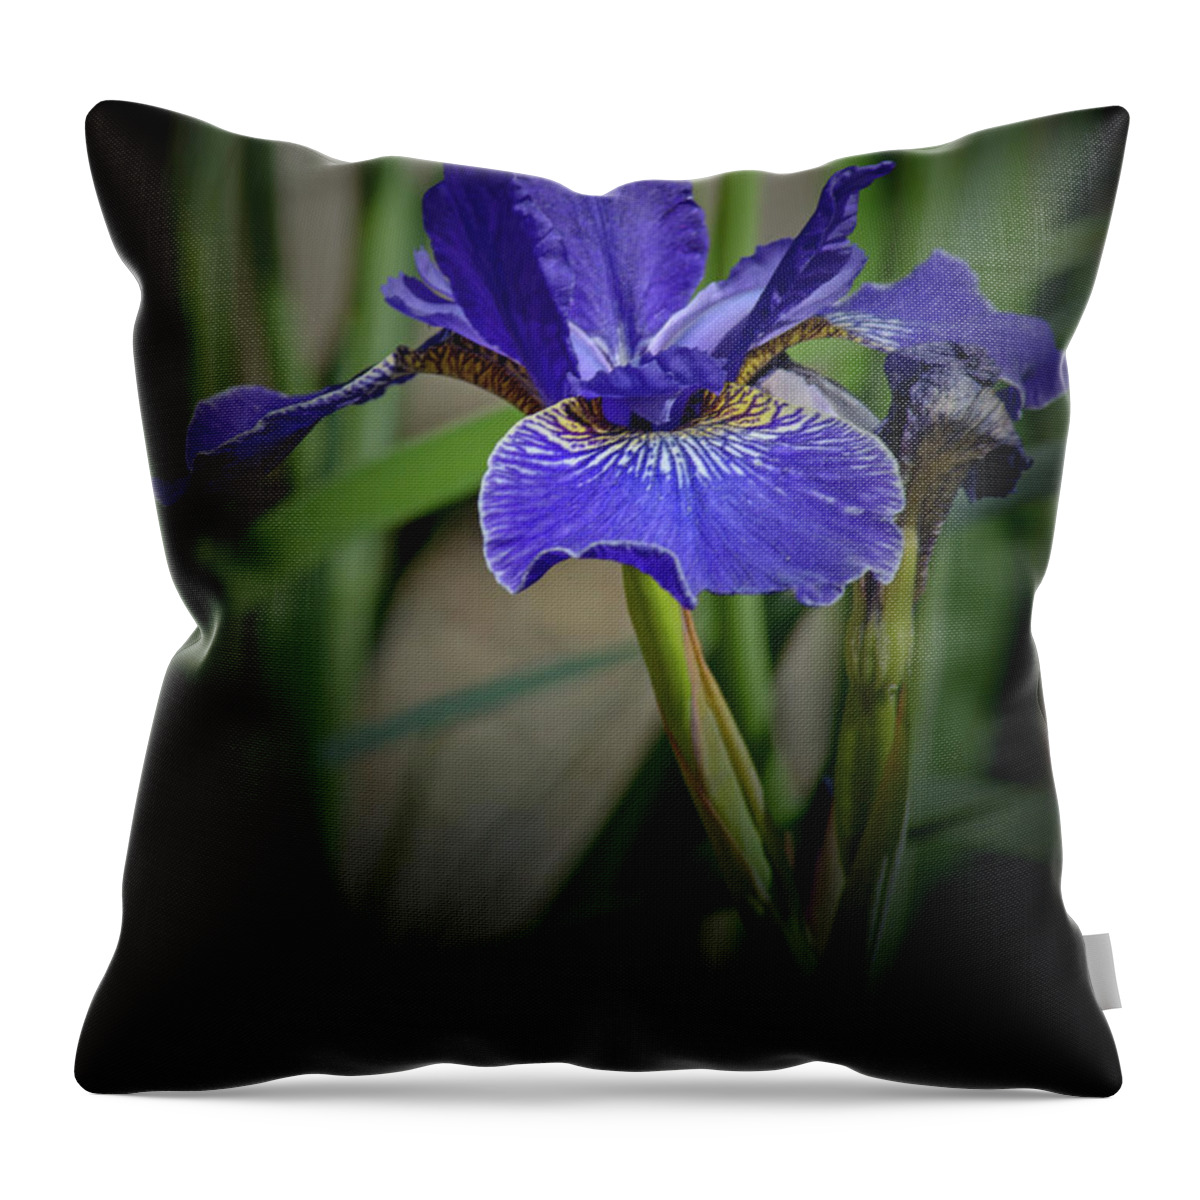 Florals Throw Pillow featuring the photograph Blue Iris by Tikvah's Hope